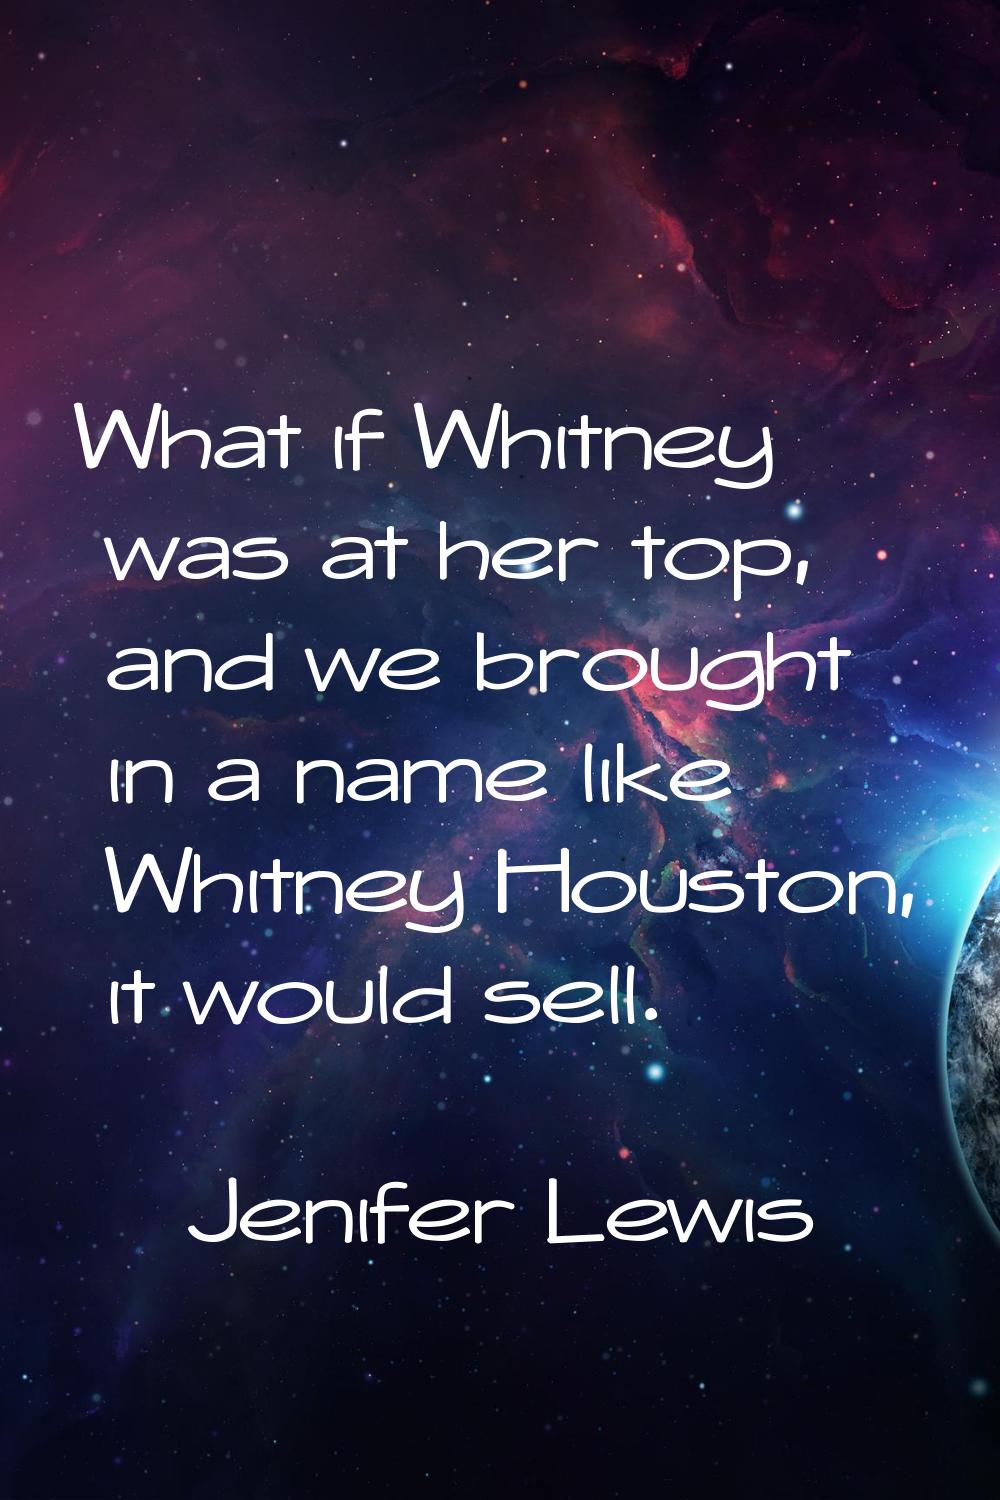 What if Whitney was at her top, and we brought in a name like Whitney Houston, it would sell.